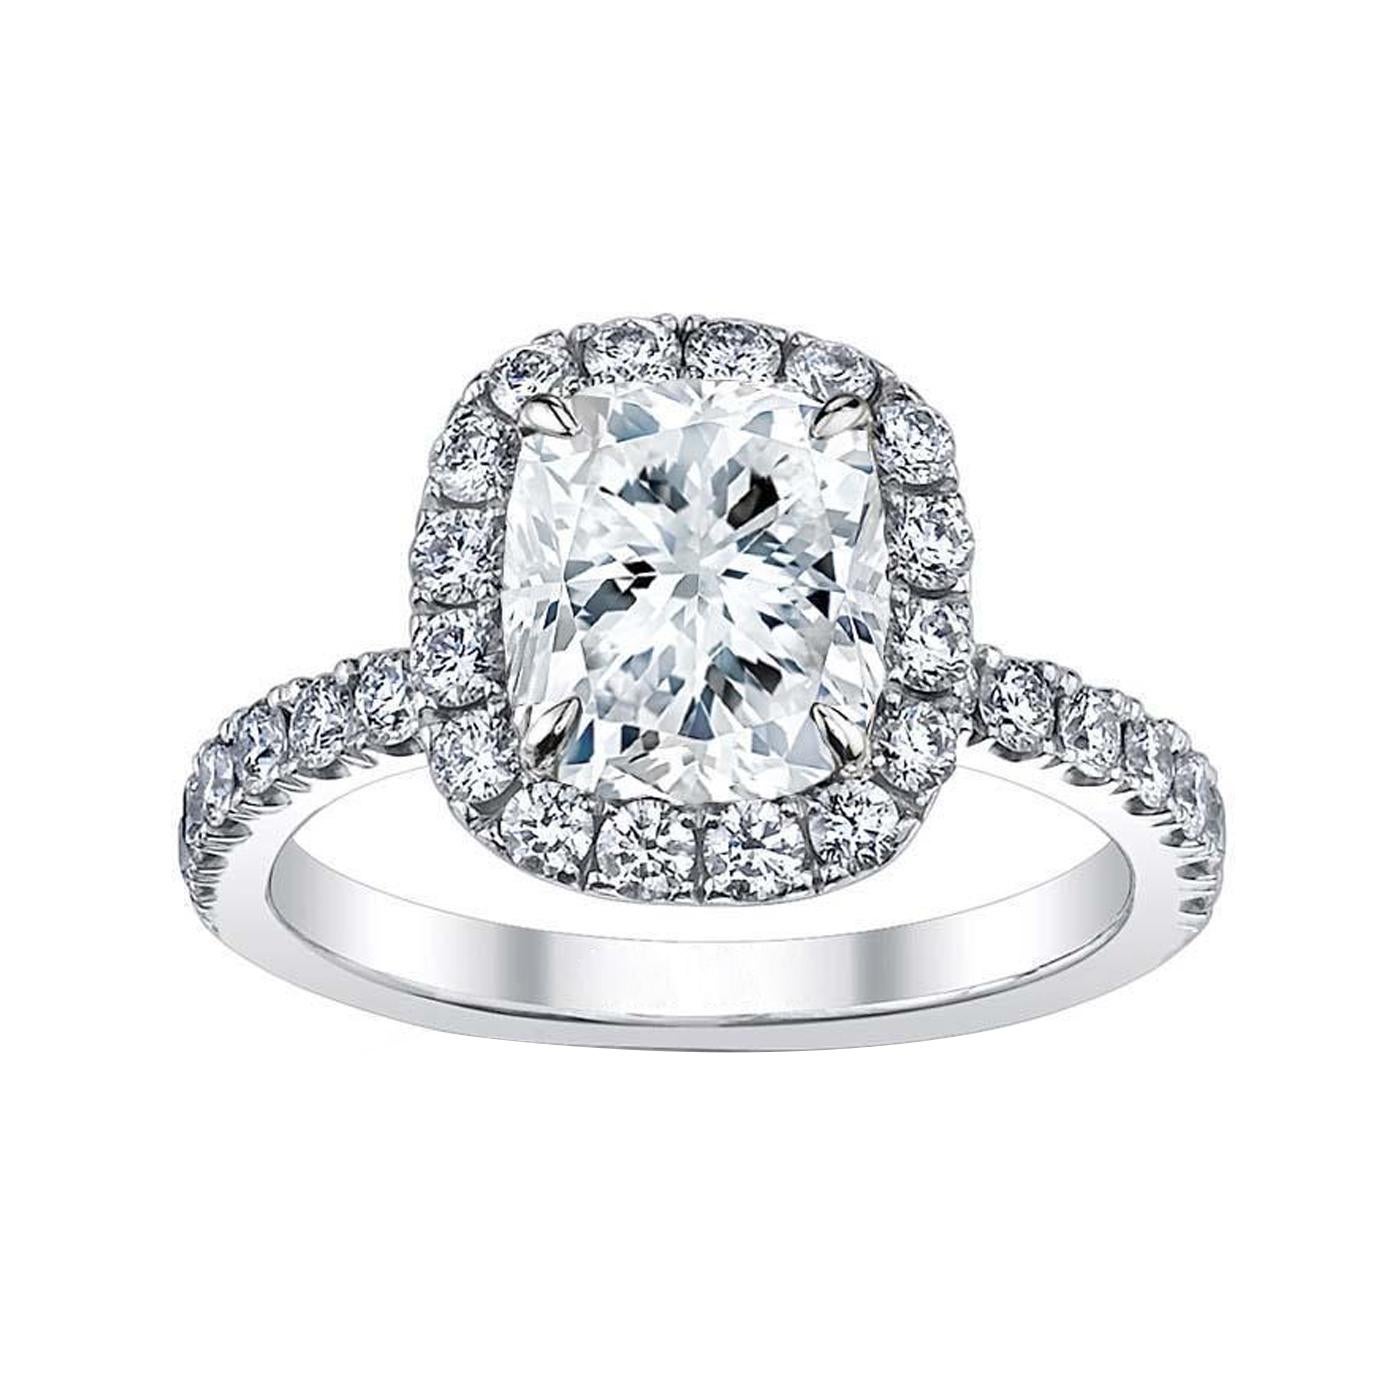 In diamond highlights, we are excited to introduce a 2.70 Carat Natural Cushion Cut Diamond Ring. This lovely Ring Features an H color and VS1 clarity and it is surrounded by Pave diamonds, with a size of 6 (Sizeable), This Cushion Diamond Ring